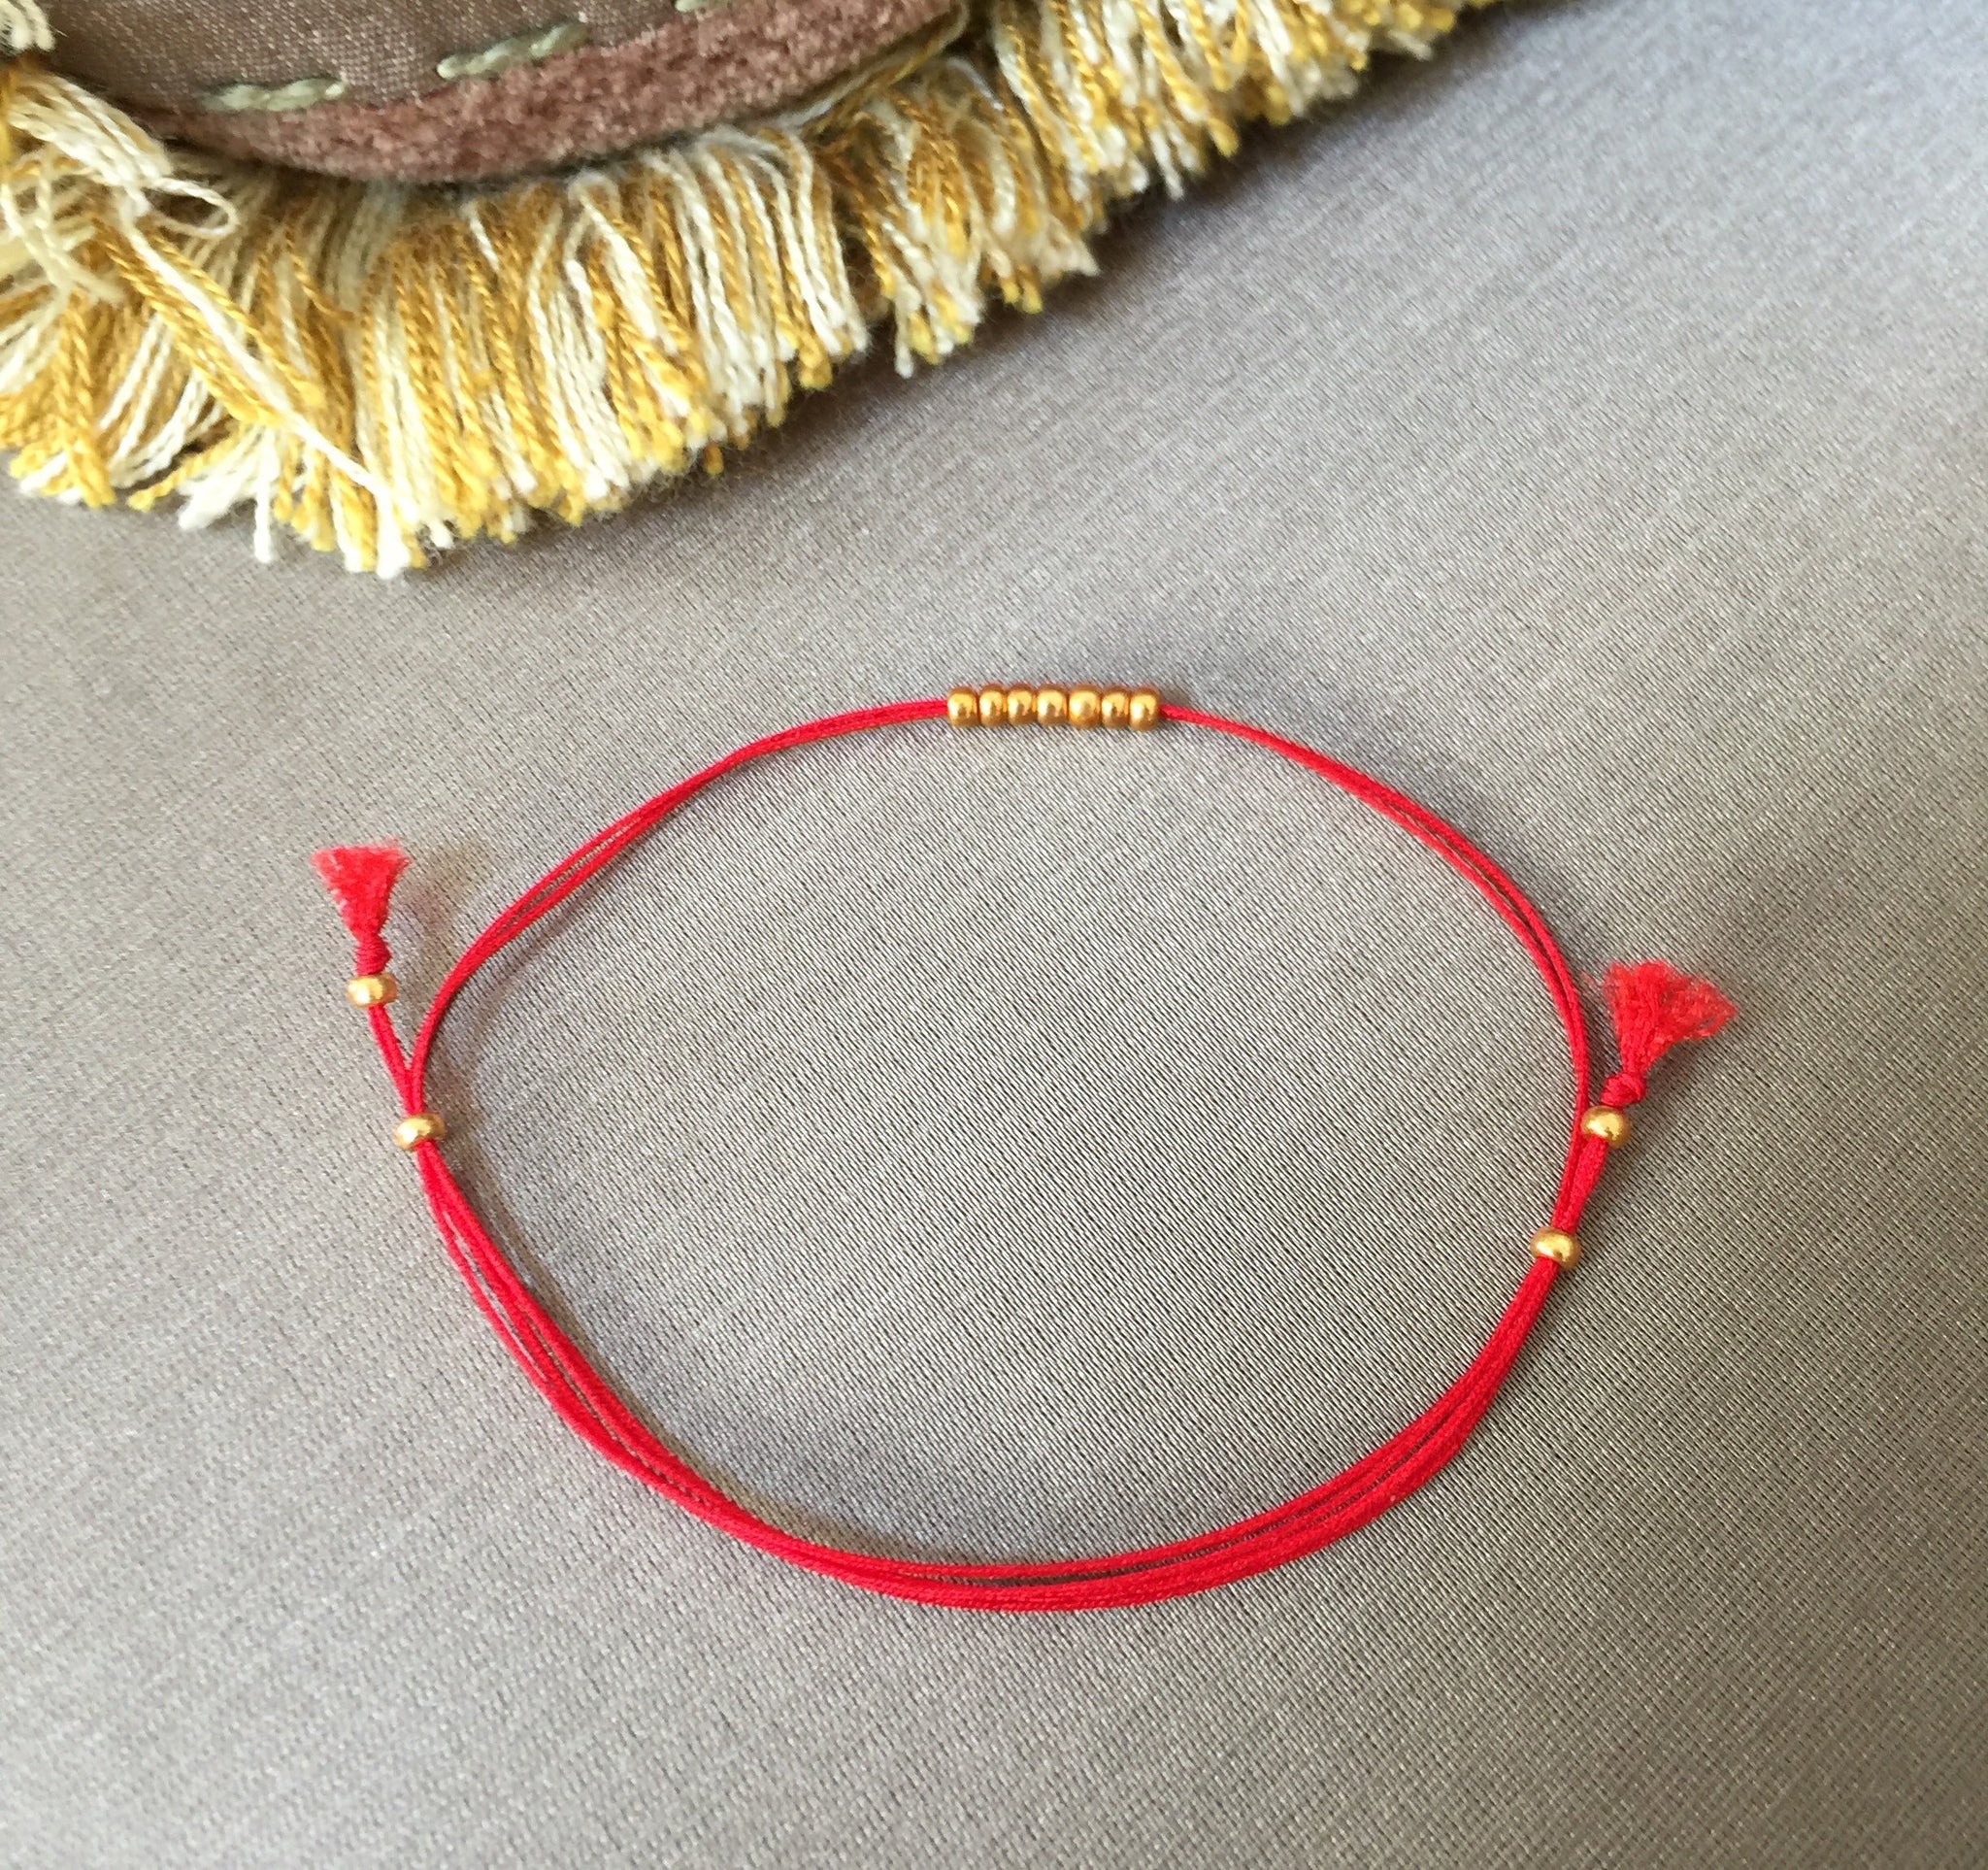 14K Gold Red String Bracelet - Luck & Protection Amulet 8 Inches / Black